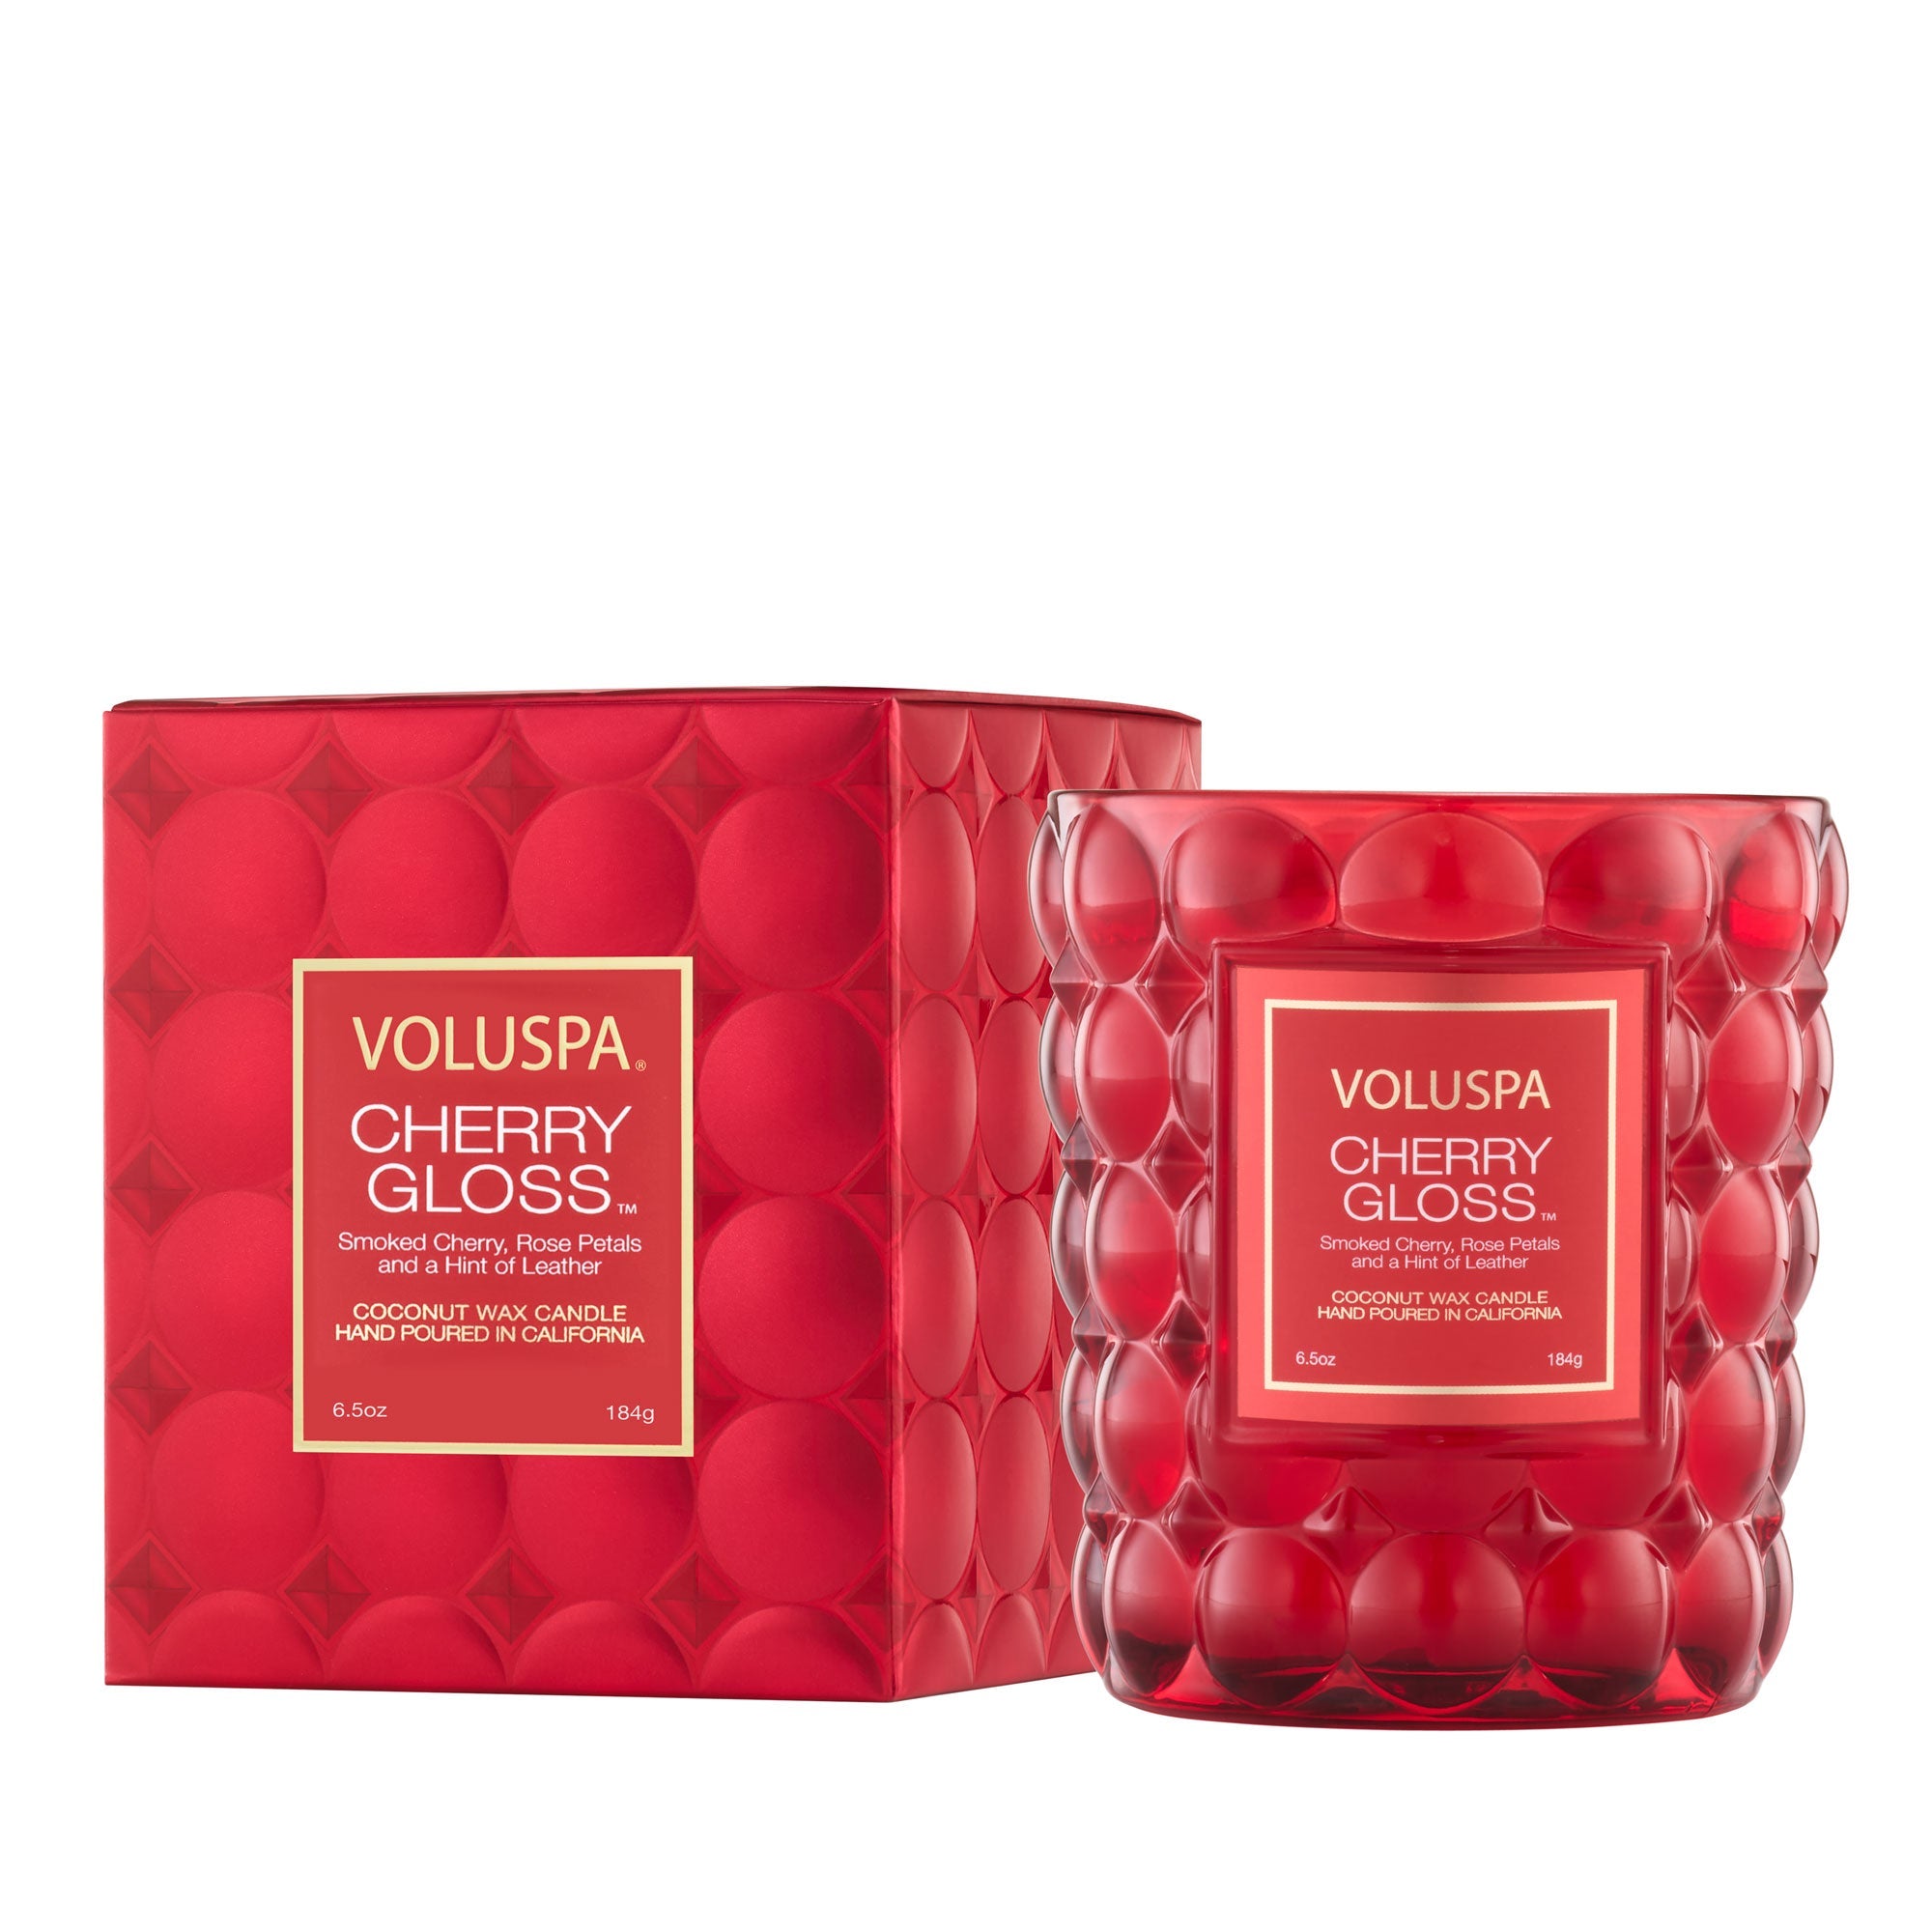 Voluspa Limited Editon Capsule Collection Boxed Classic 6oz Candle - Cherry Gloss